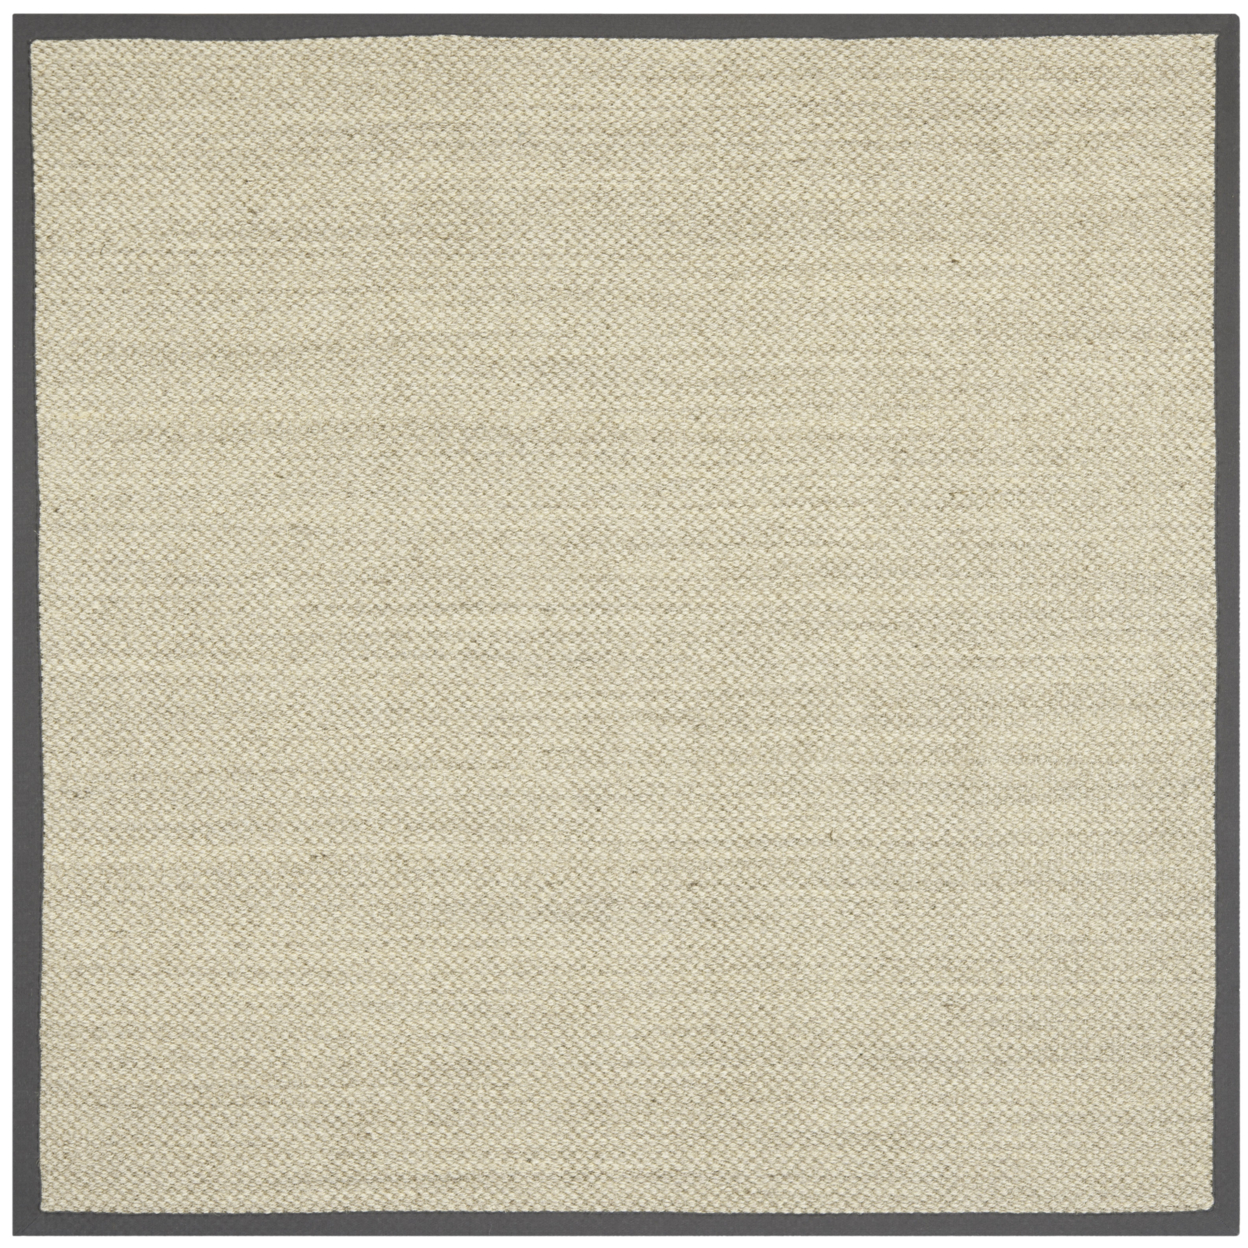 SAFAVIEH Natural Fiber Collection NF443B Marble/Grey Rug - 6' Square